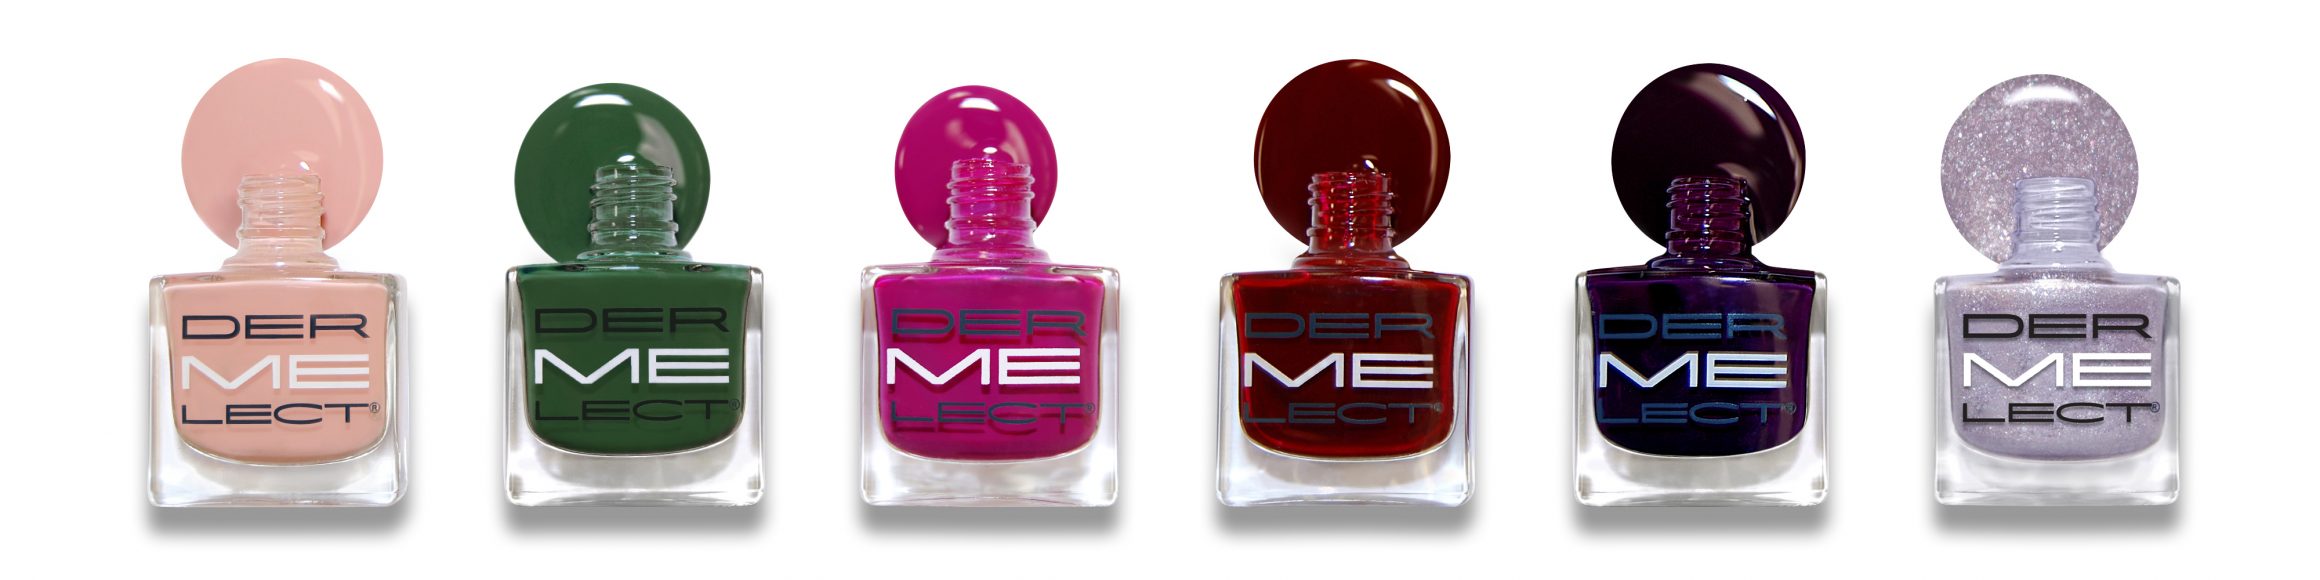 Dermelect's selection of fall nail colors. Photo courtesy of Dermelect Cosmeceuticals.